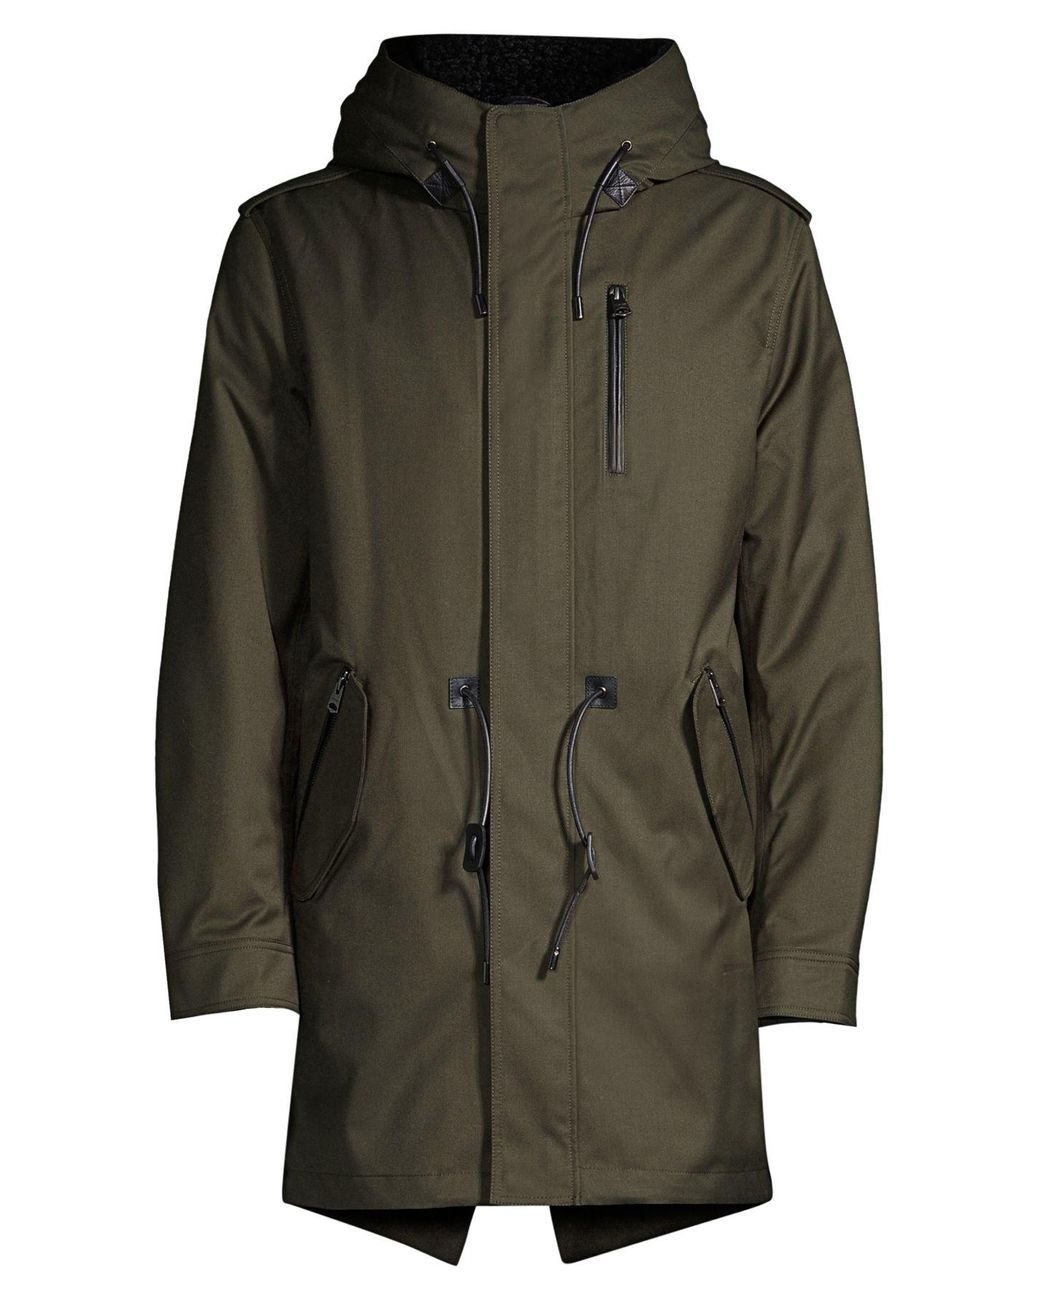 Mackage Synthetic Moritz Military Parka in Green for Men - Lyst